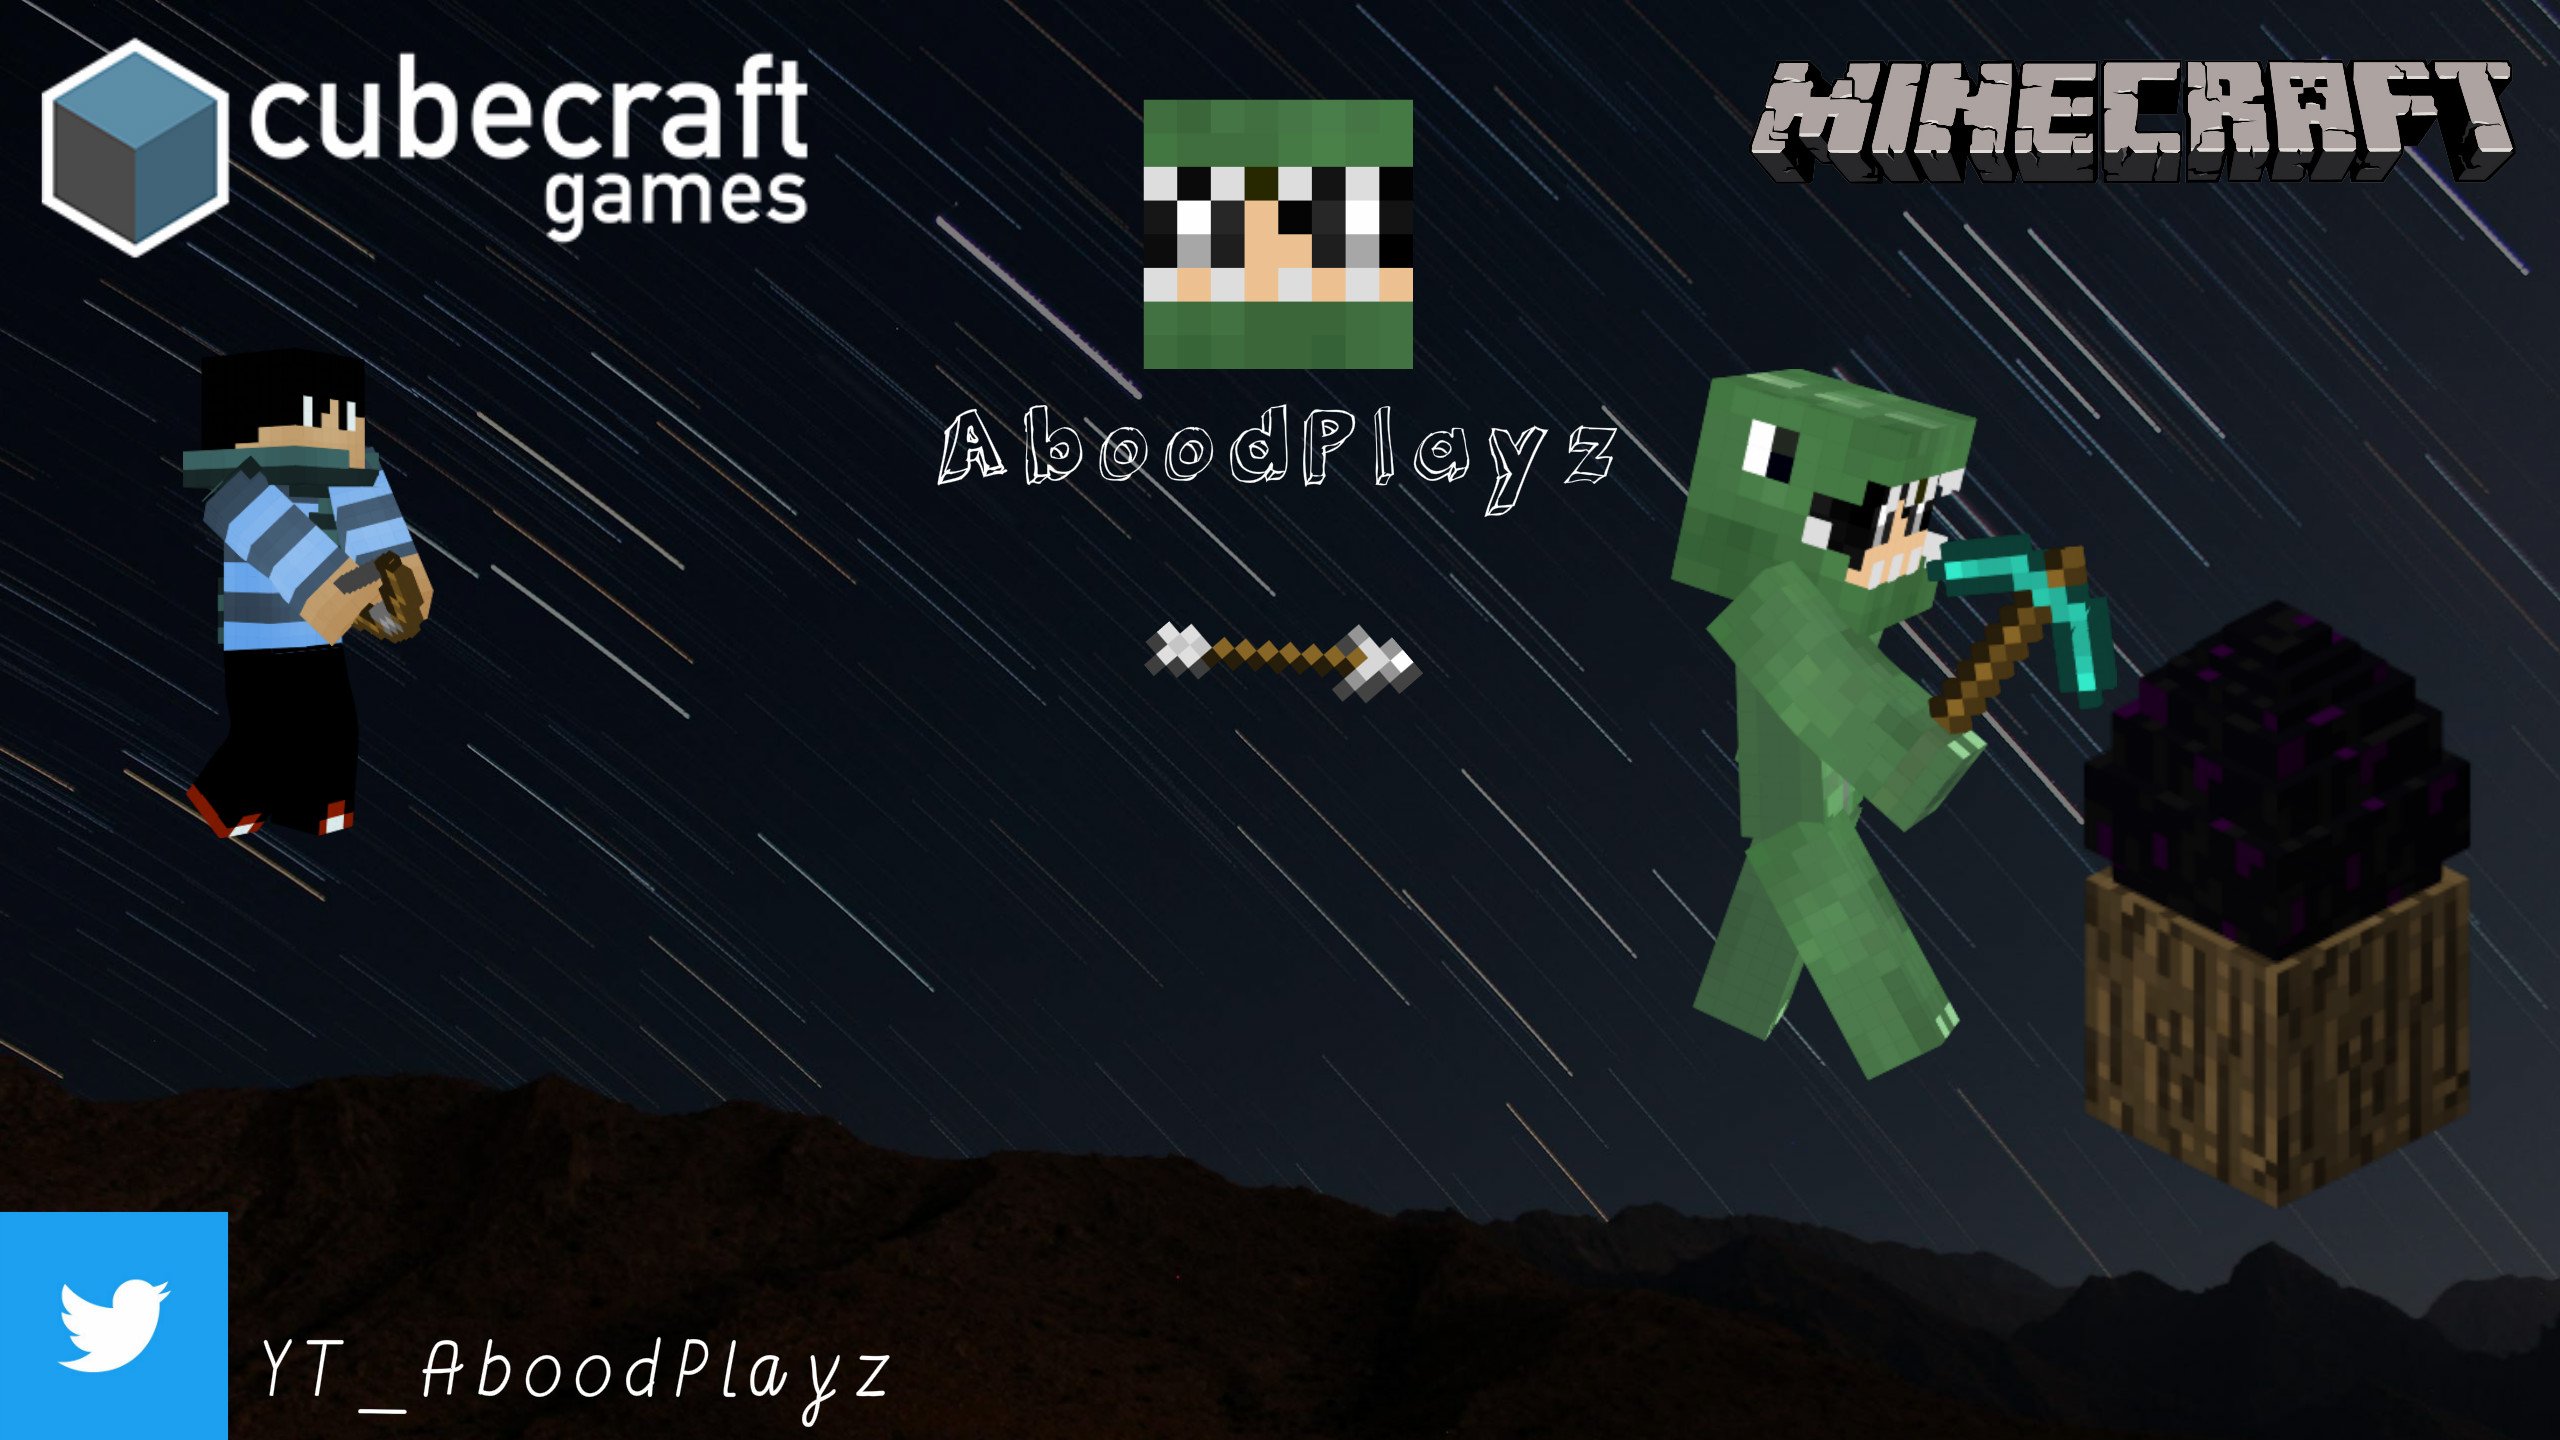 Artwork My 30 Minutes Of Work Making A Youtube Channel Art Cubecraft Games